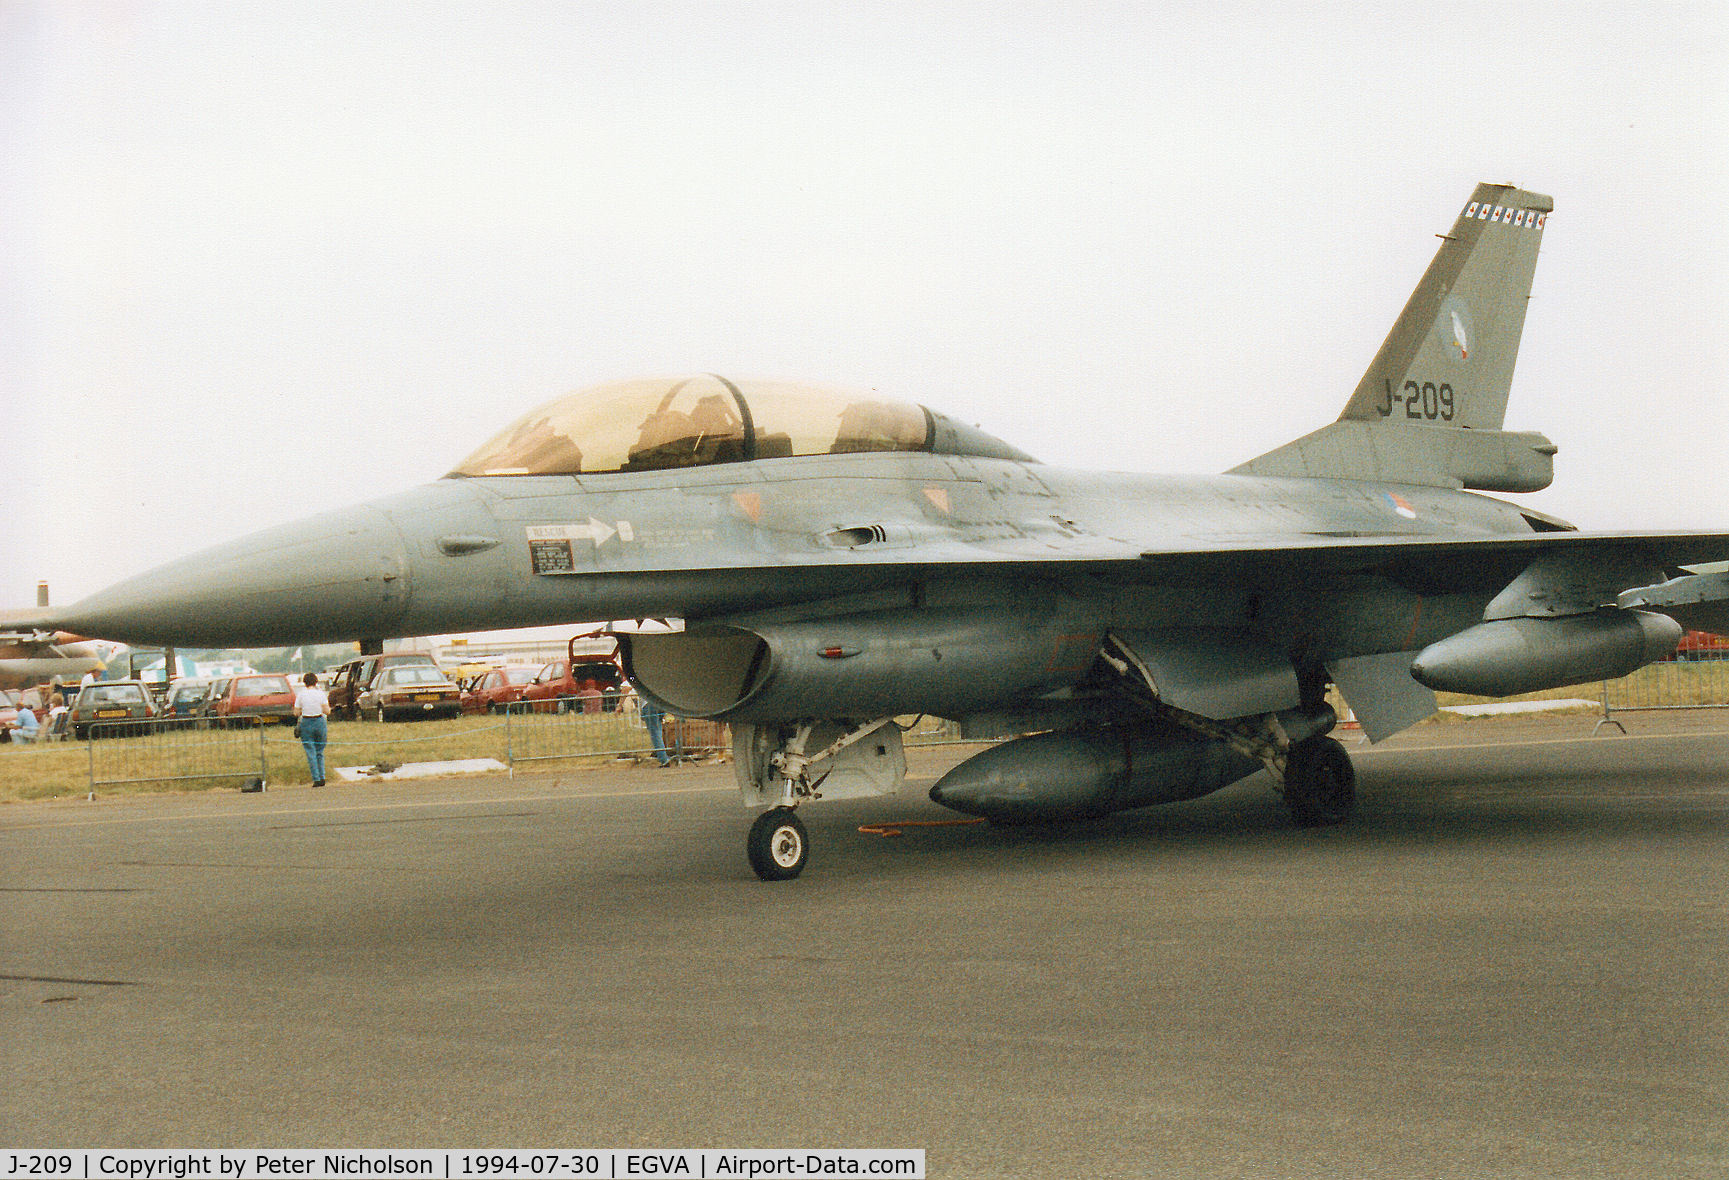 J-209, 1983 General Dynamics F-16BM Fighting Falcon C/N 6E-28, F-16B Falcon, callsign Polly 2, of 322 Squadron of the Royal Netherlands Air Force at Leeuwarden on display at the 1994 Intnl Air Tattoo at RAF Fairford.